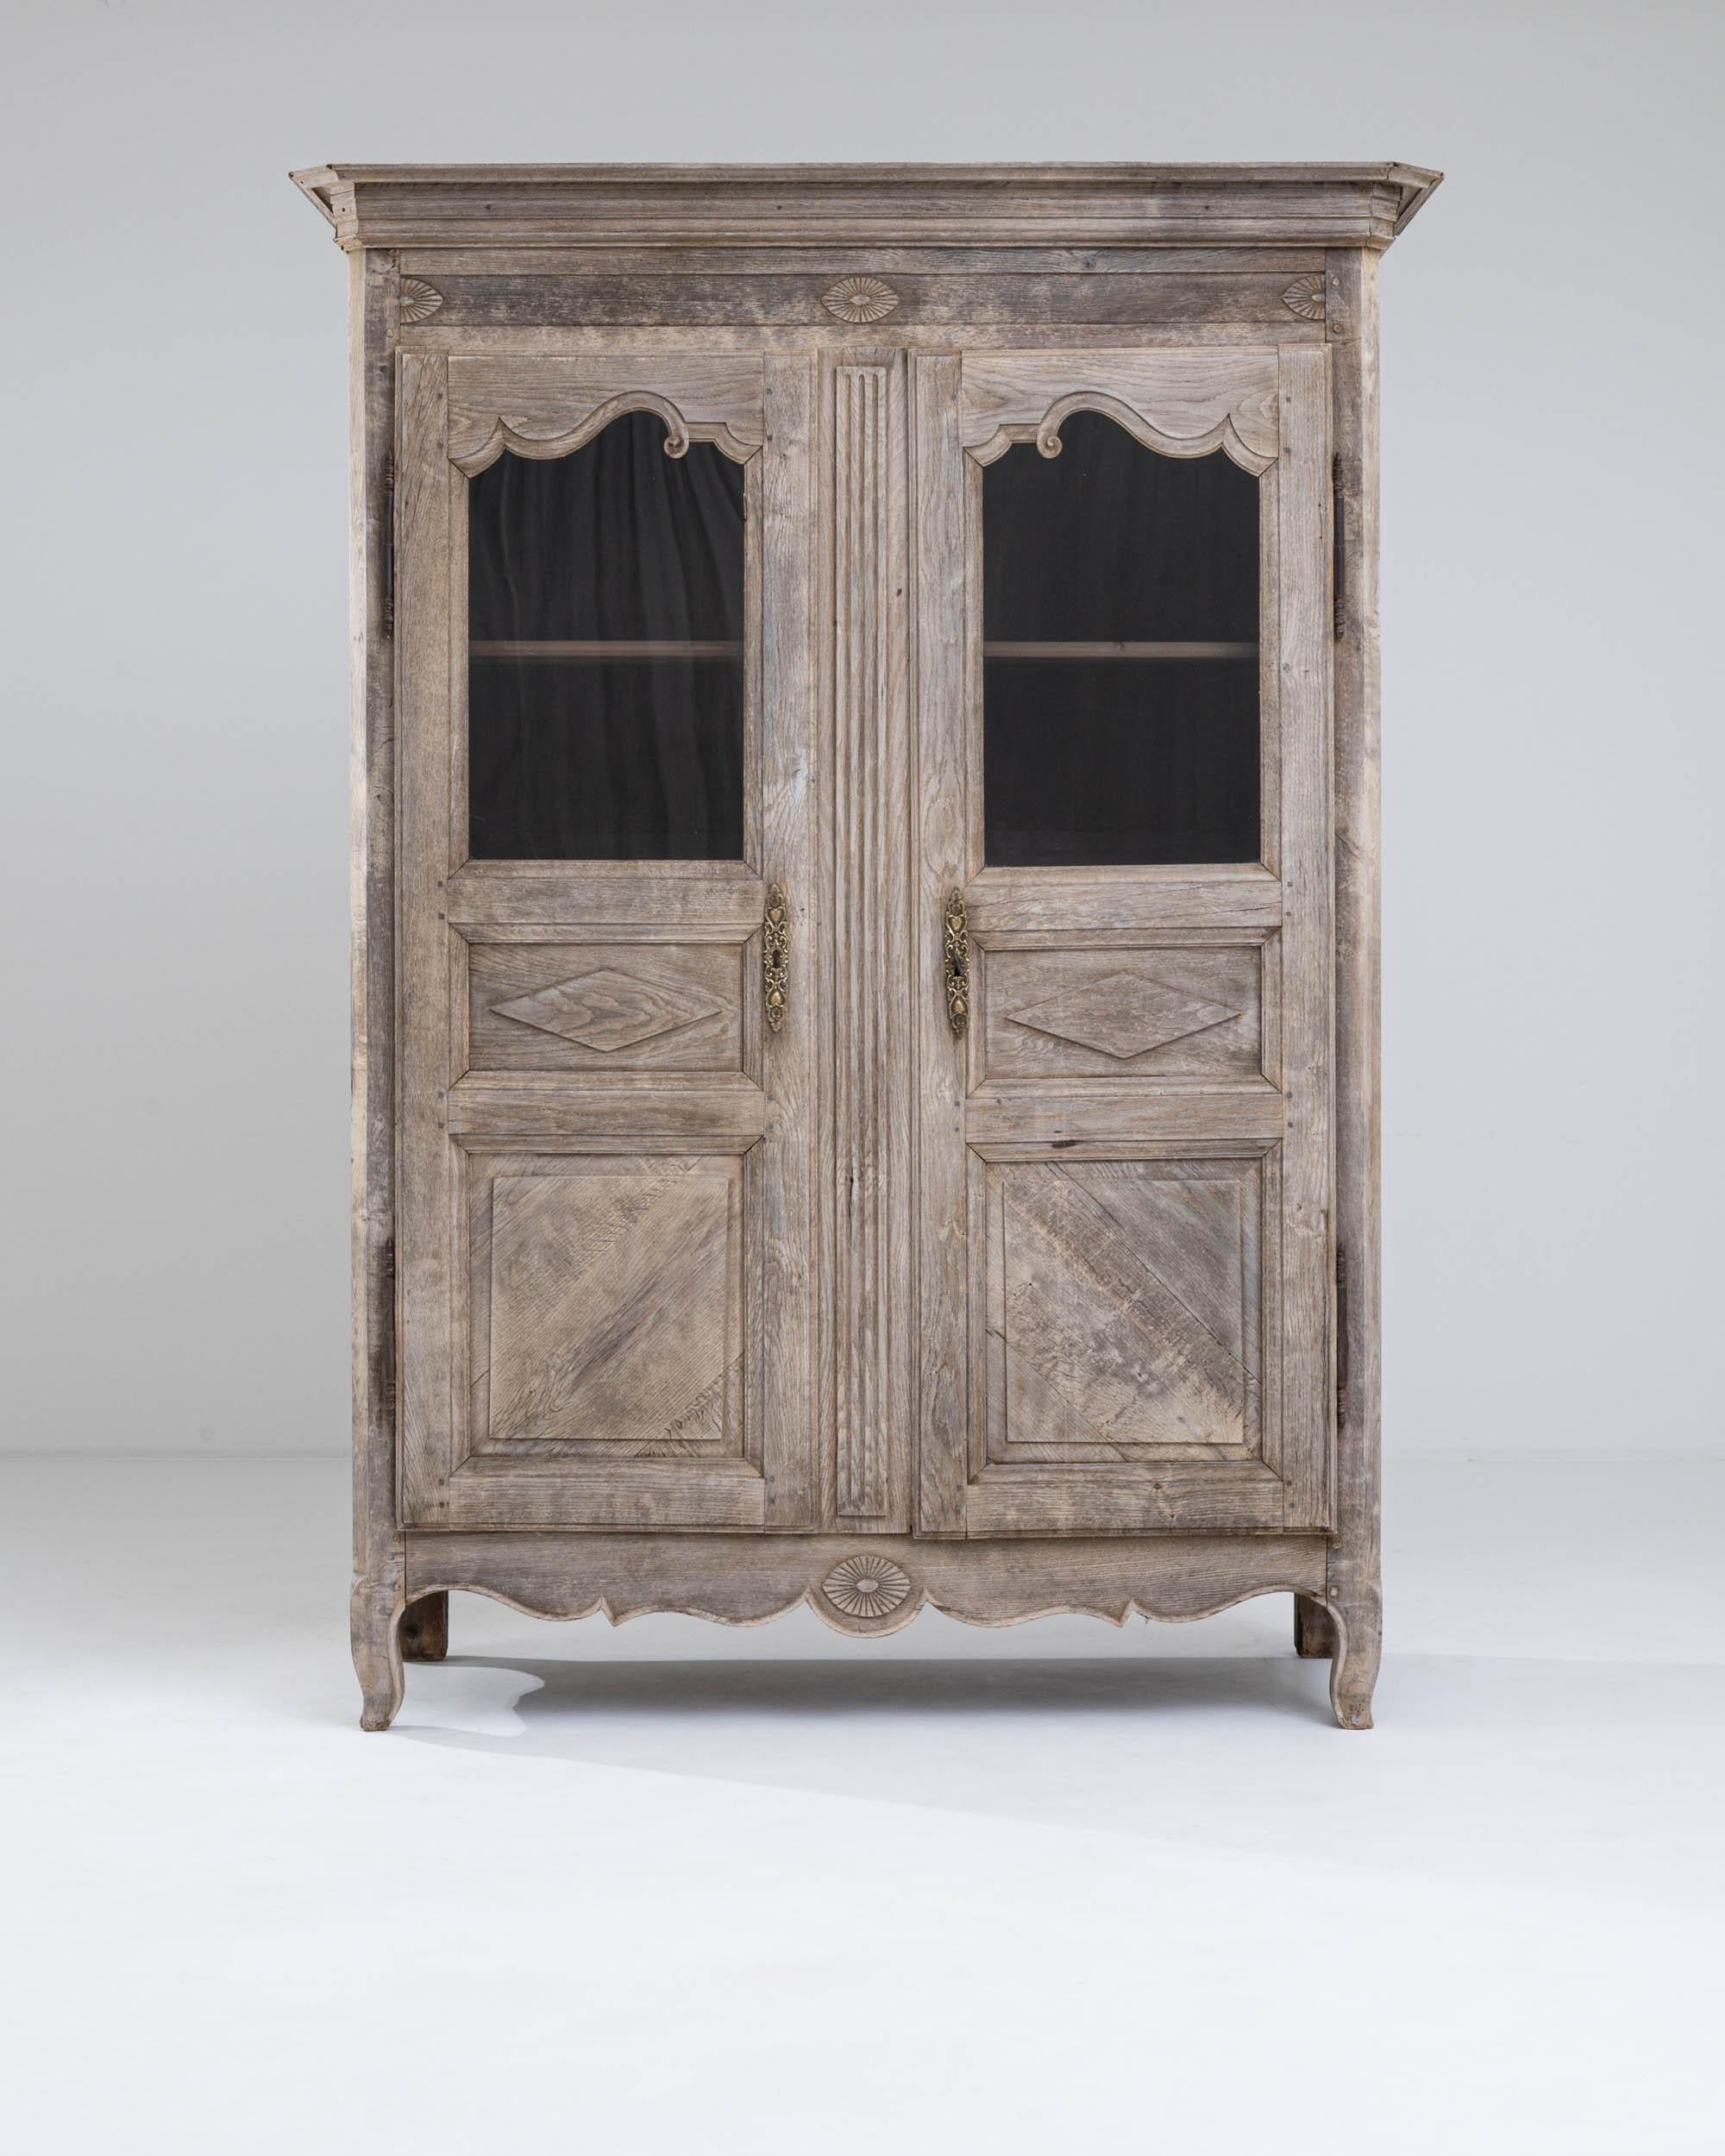 A wooden vitrine made in 19th century France. This lavish vitrine exudes an aura of dignified beauty, featuring two glass paned doors which swing outwards to reveal three shelves. A delicate bleaching process has been applied to the oak,